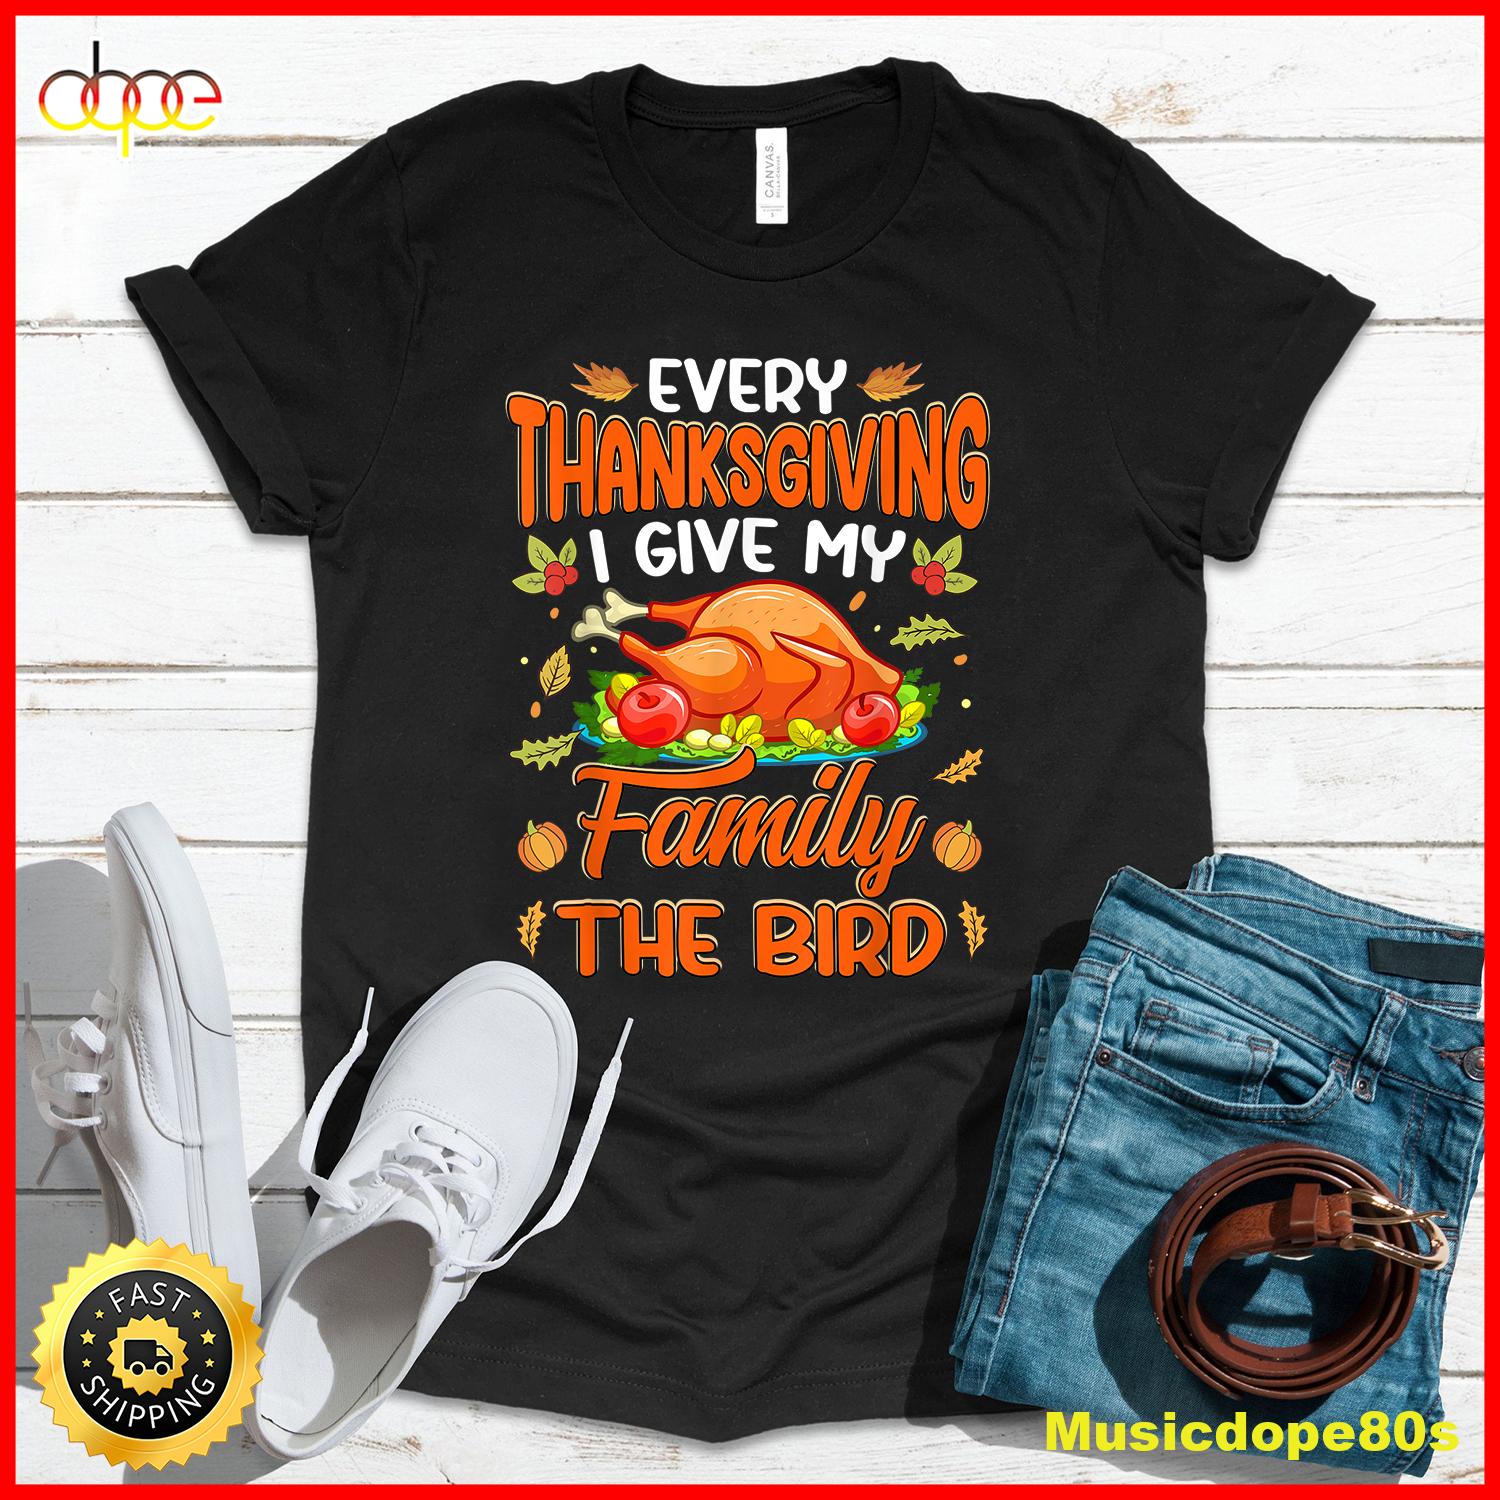 Funny Thanksgiving Family Matching For Mens Womens Adults T Shirt